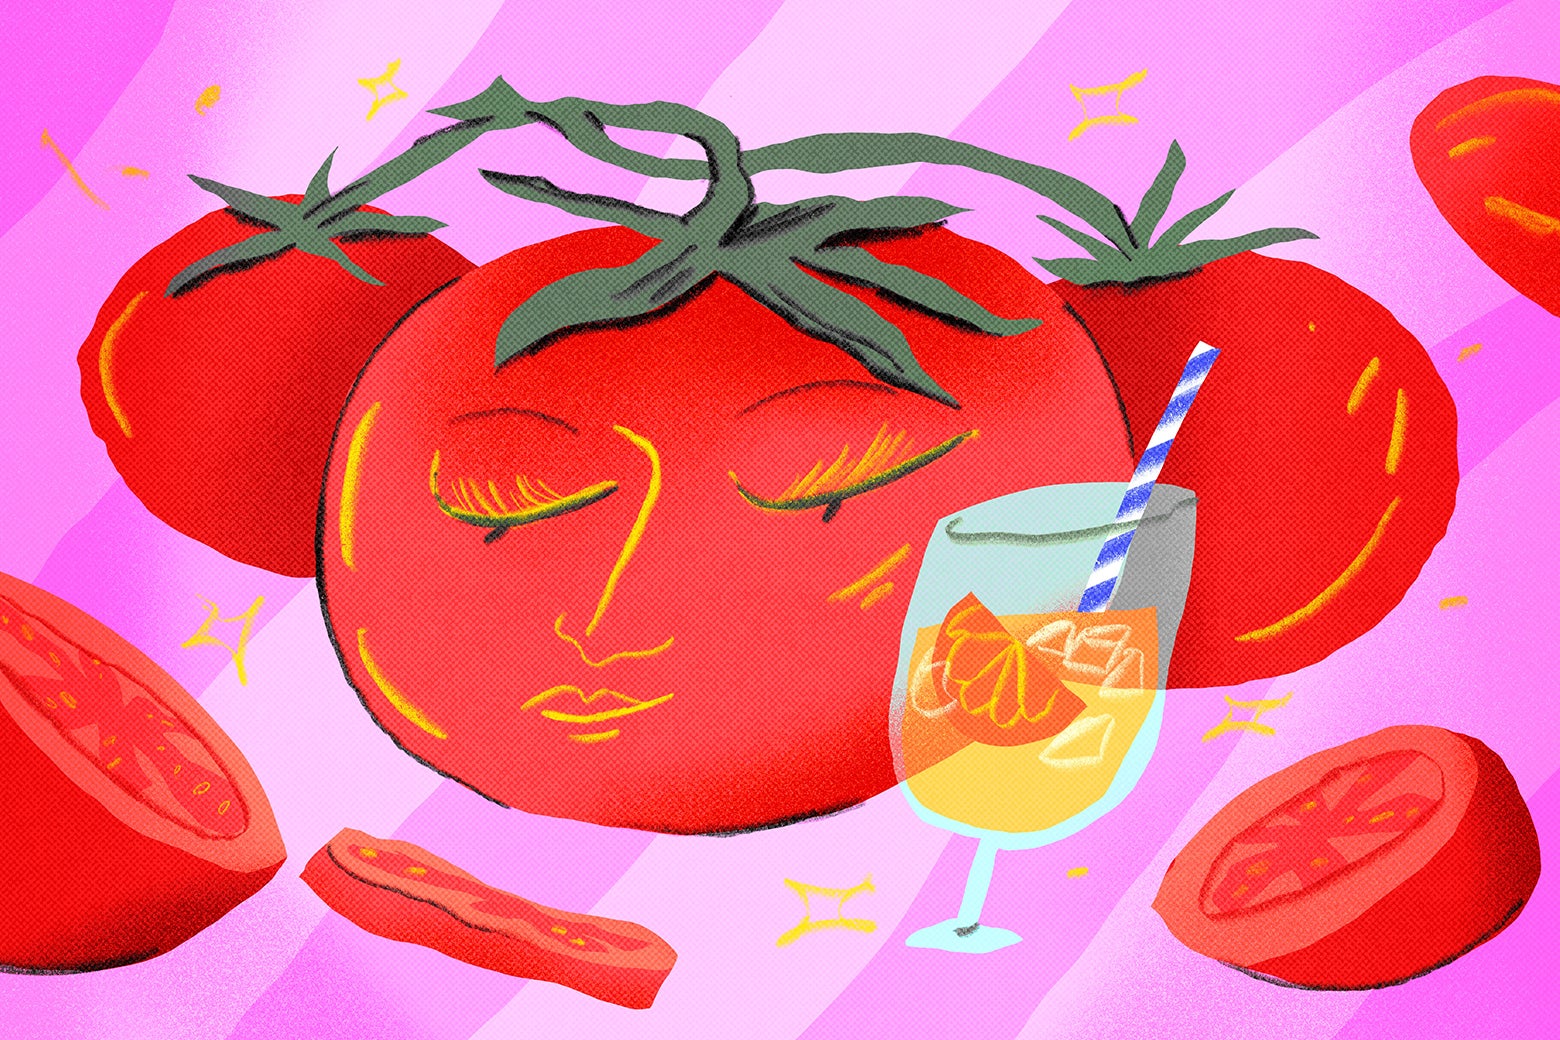 An illustration of a tomato with eyelashes holding an Aperol Spritz and looking pretty relaxed.